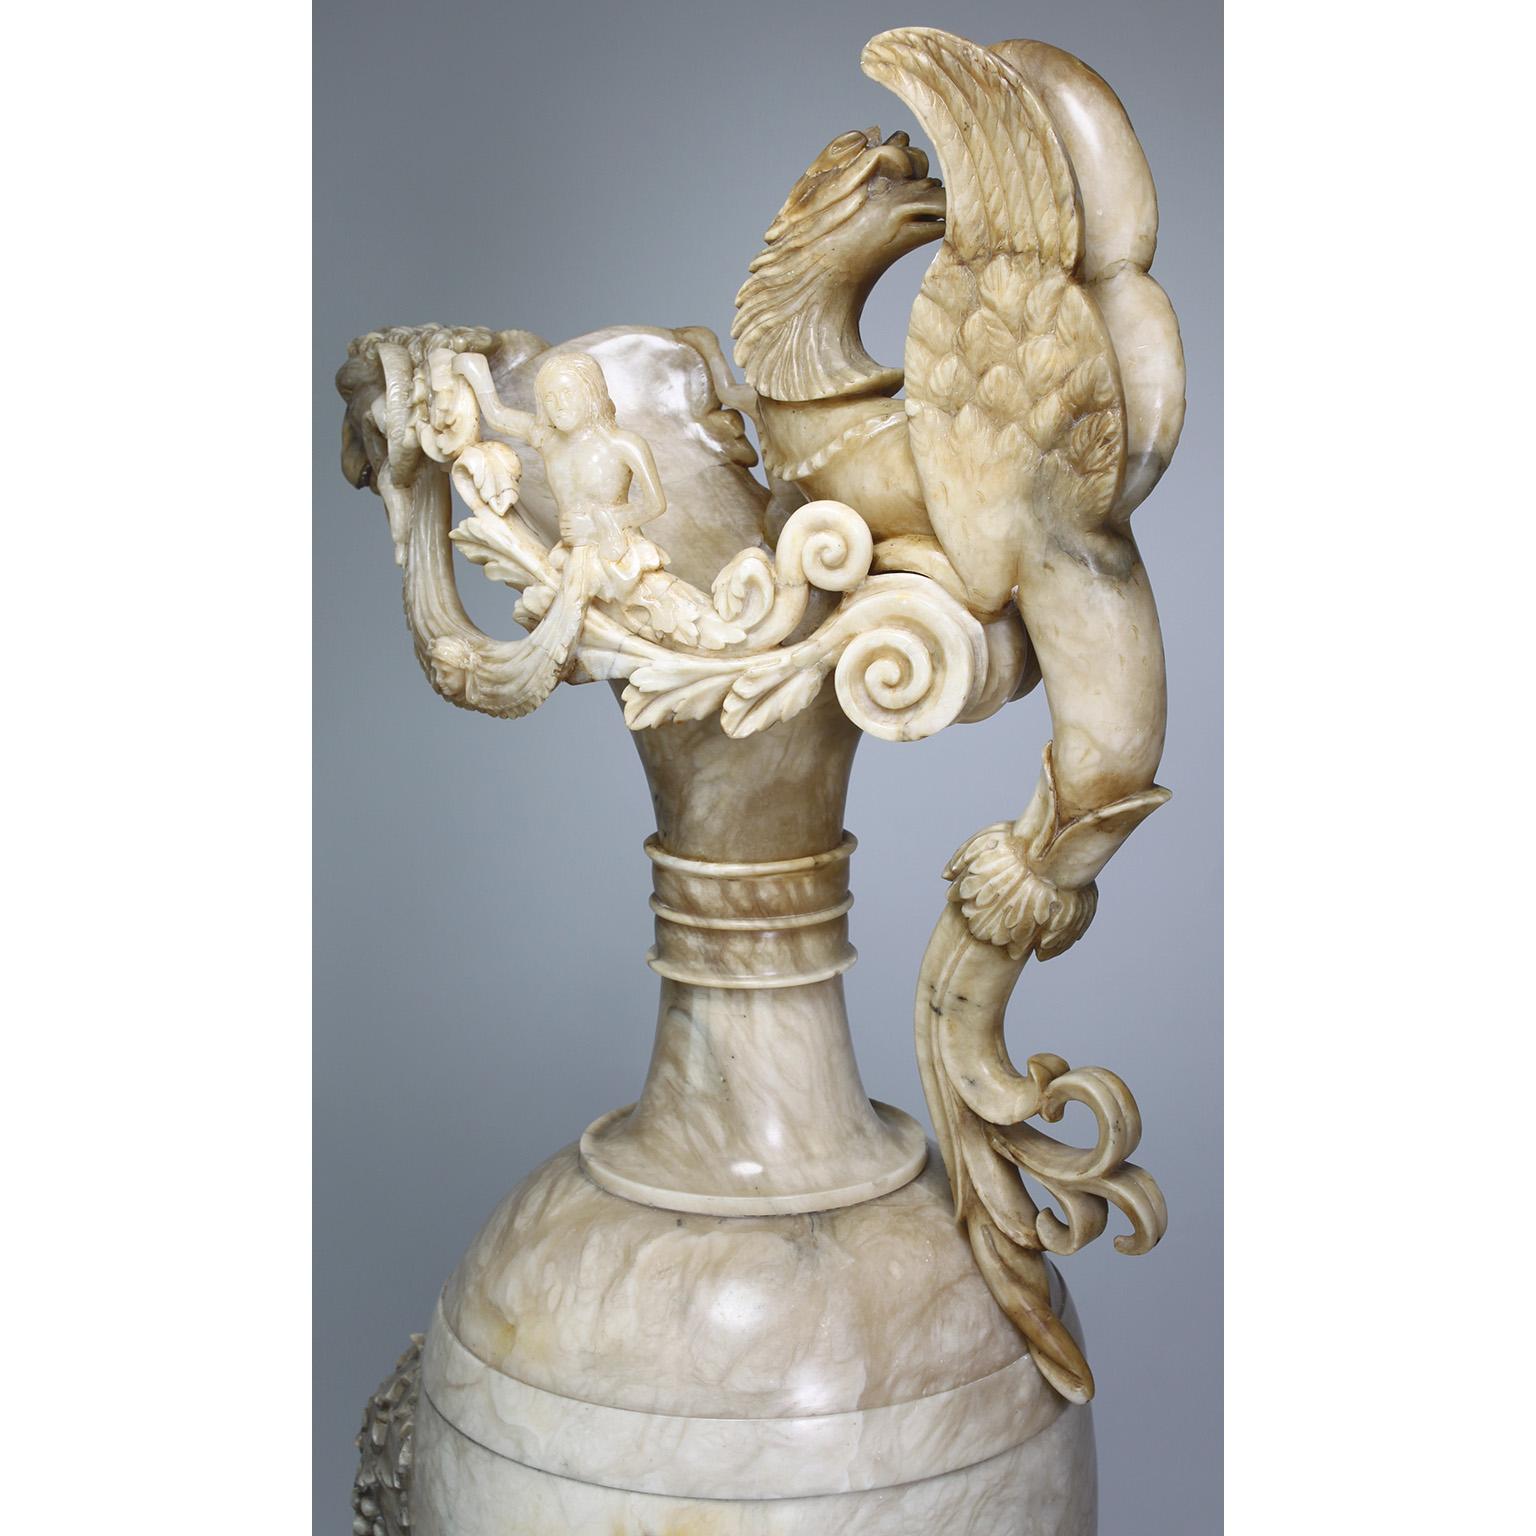 Monumental Italian 19th Century Renaissance Revival Style Carved Alabaster Urn  For Sale 2